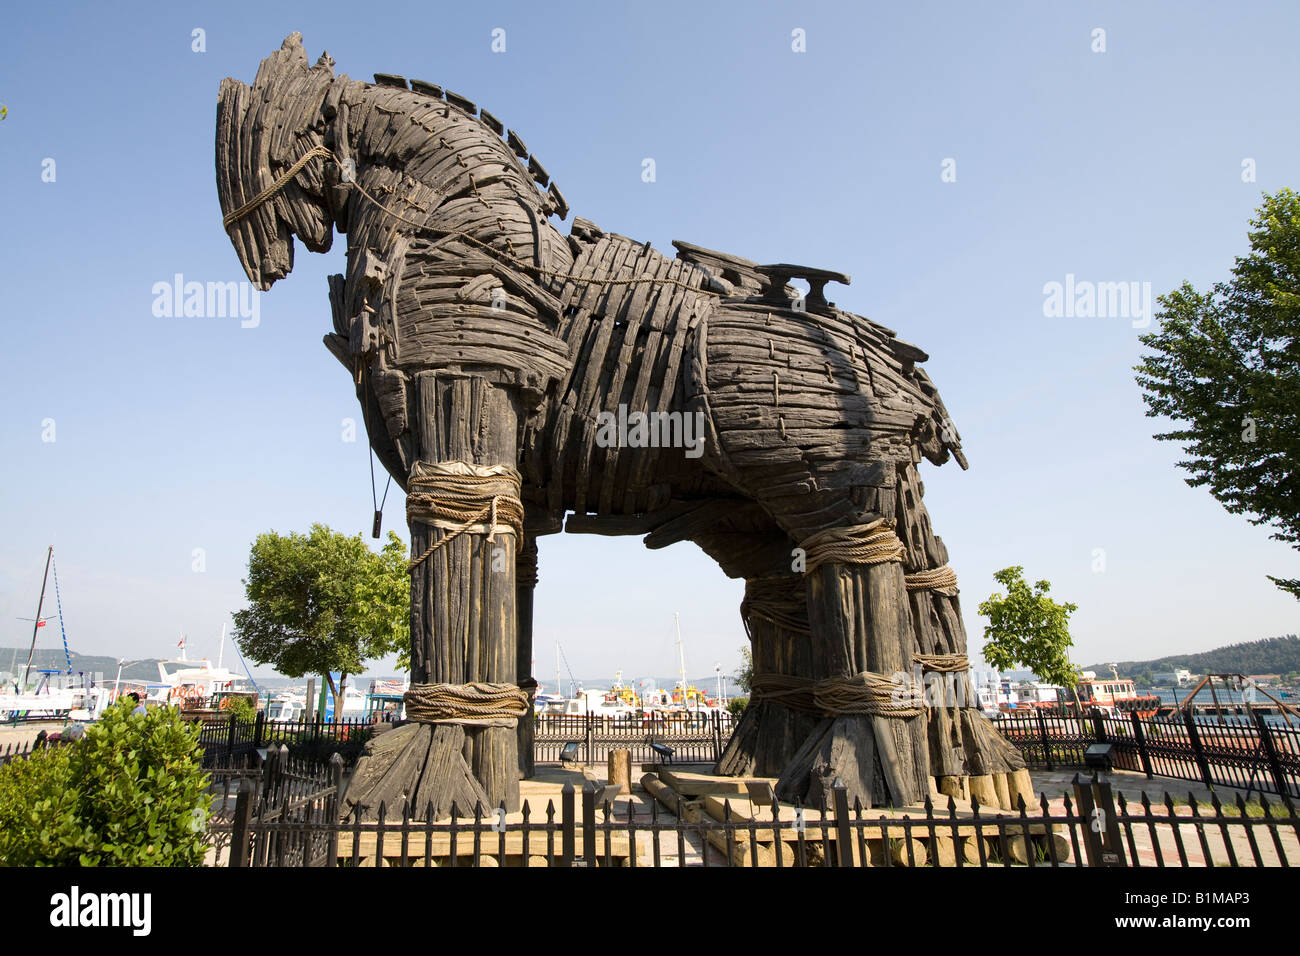 The wooden horse from the film Troy at Canakkale near Troy on the Aegean Coast of Turkey Stock Photo